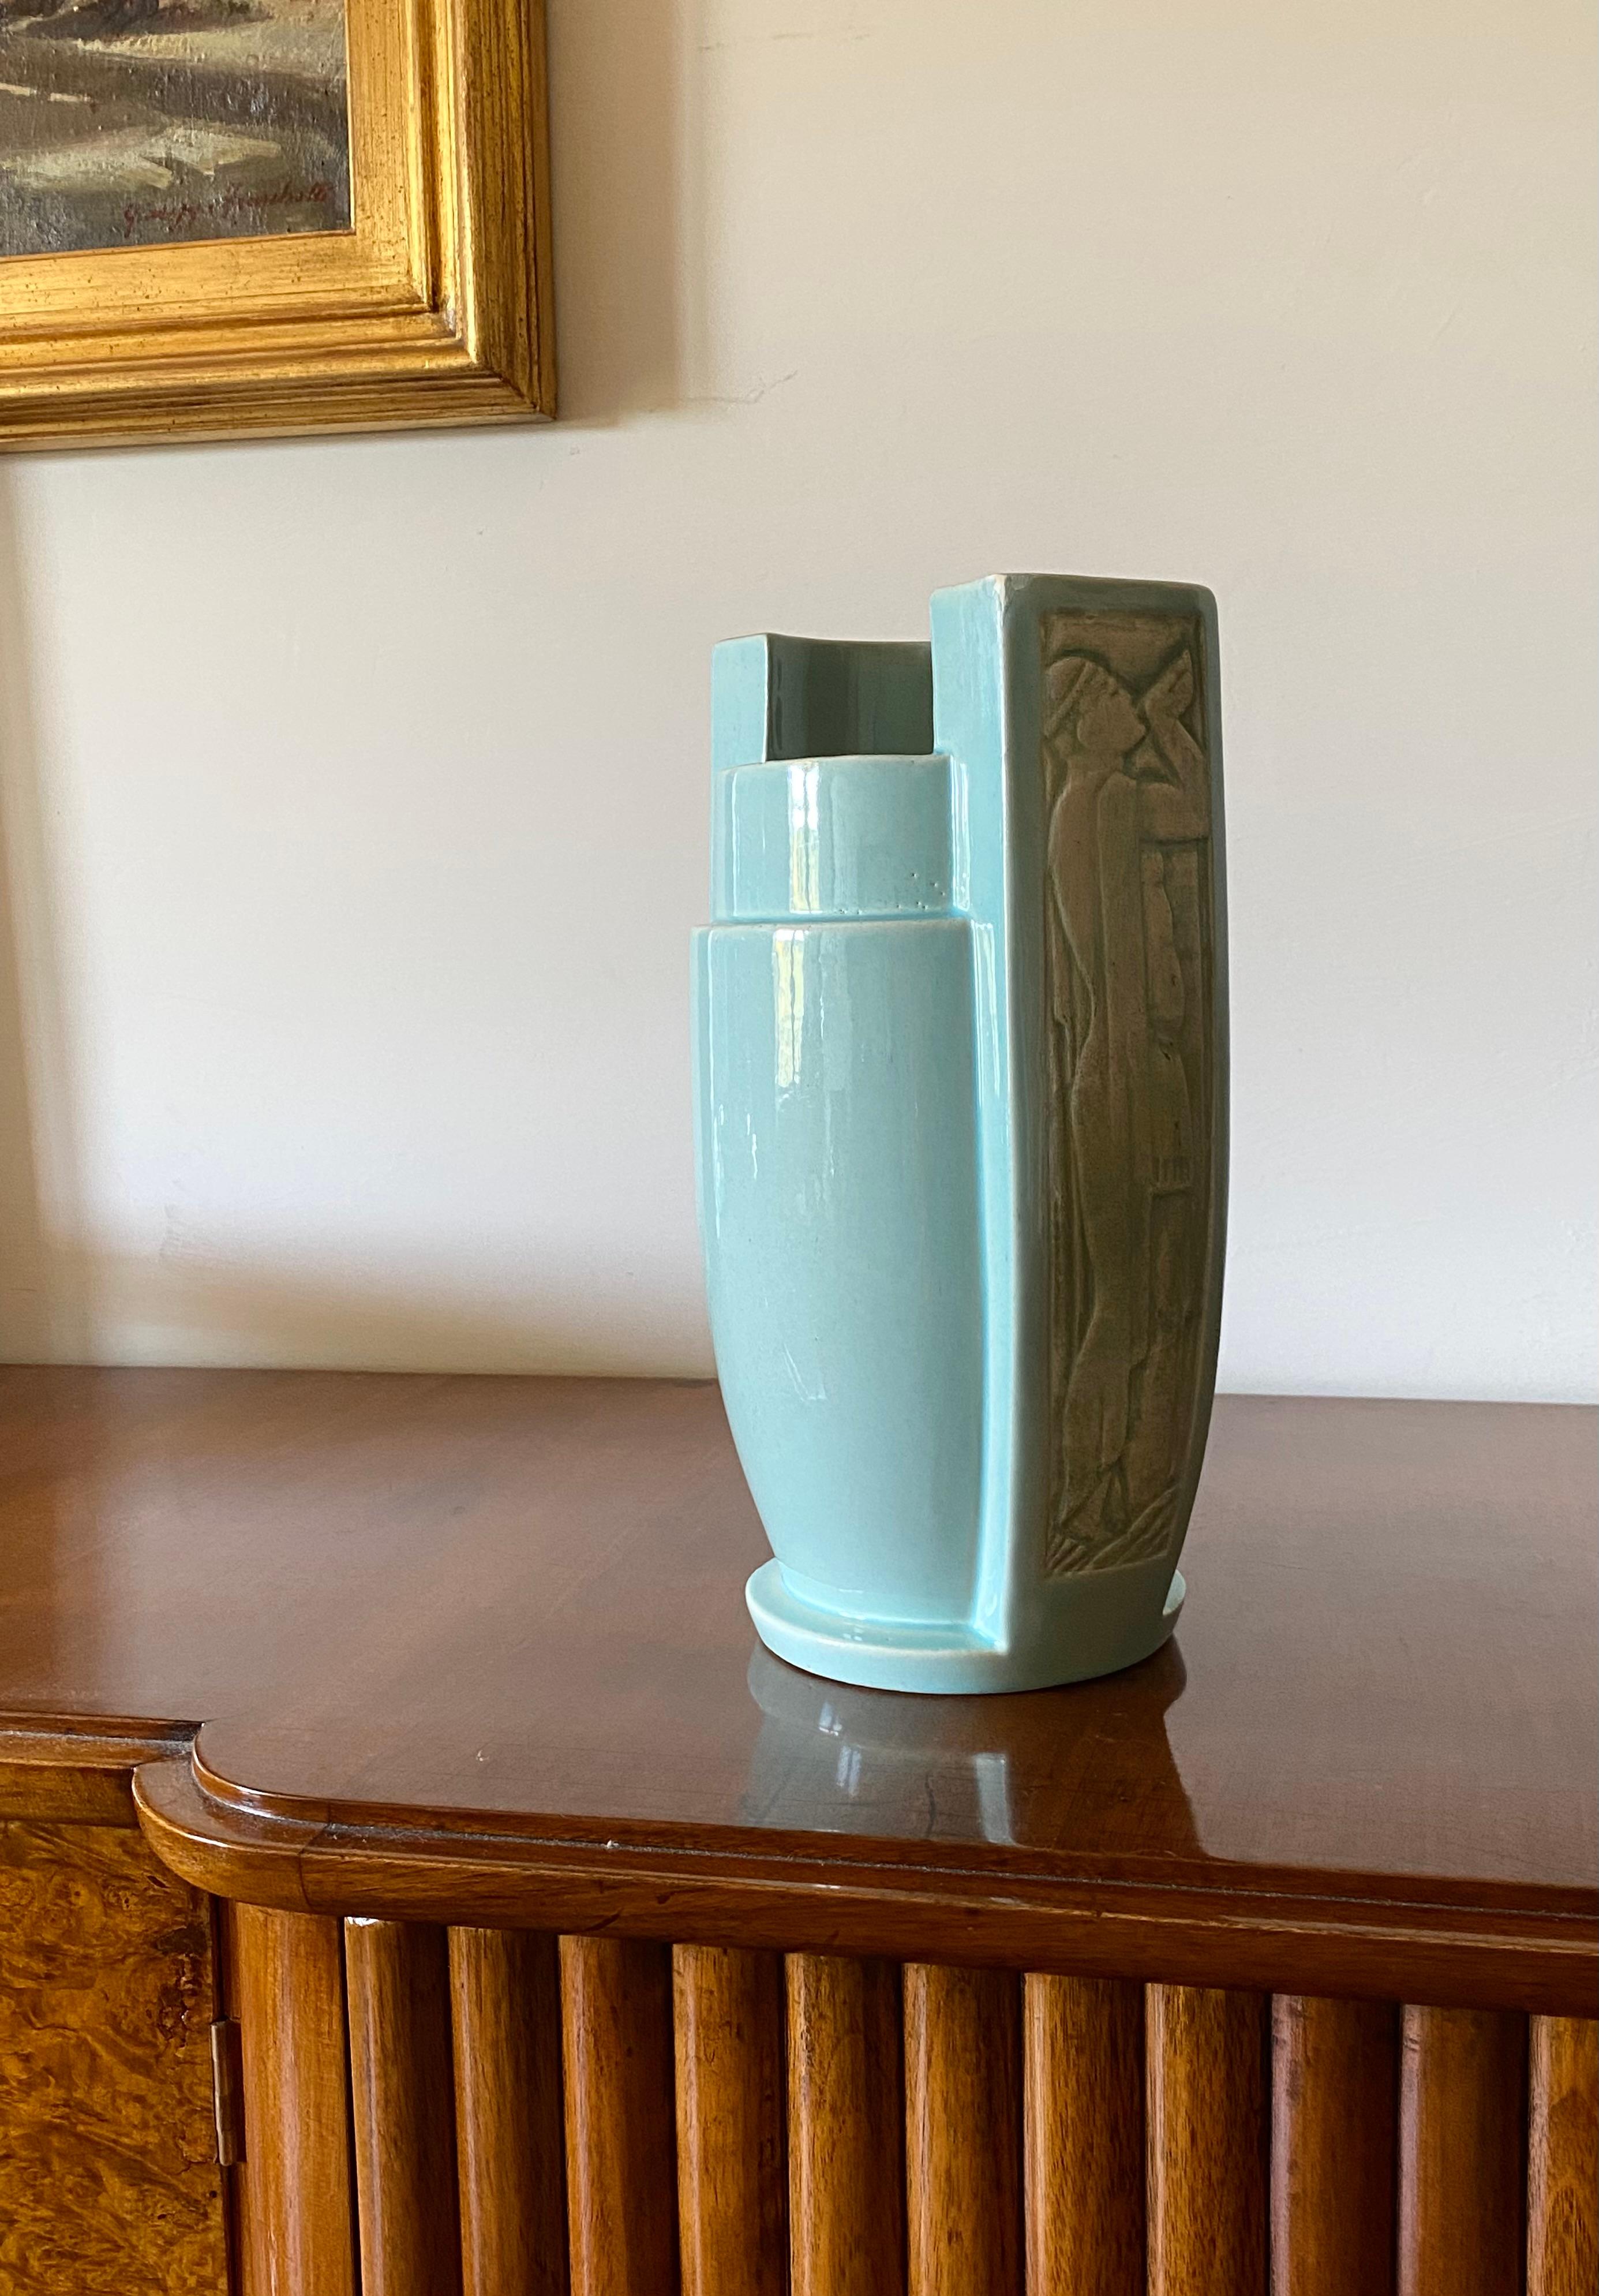 Art Deco azure ceramic vase

France 1940s

30 cm H - diam. 17 cm

Conditions: very good. Barely visible chip on one angle.